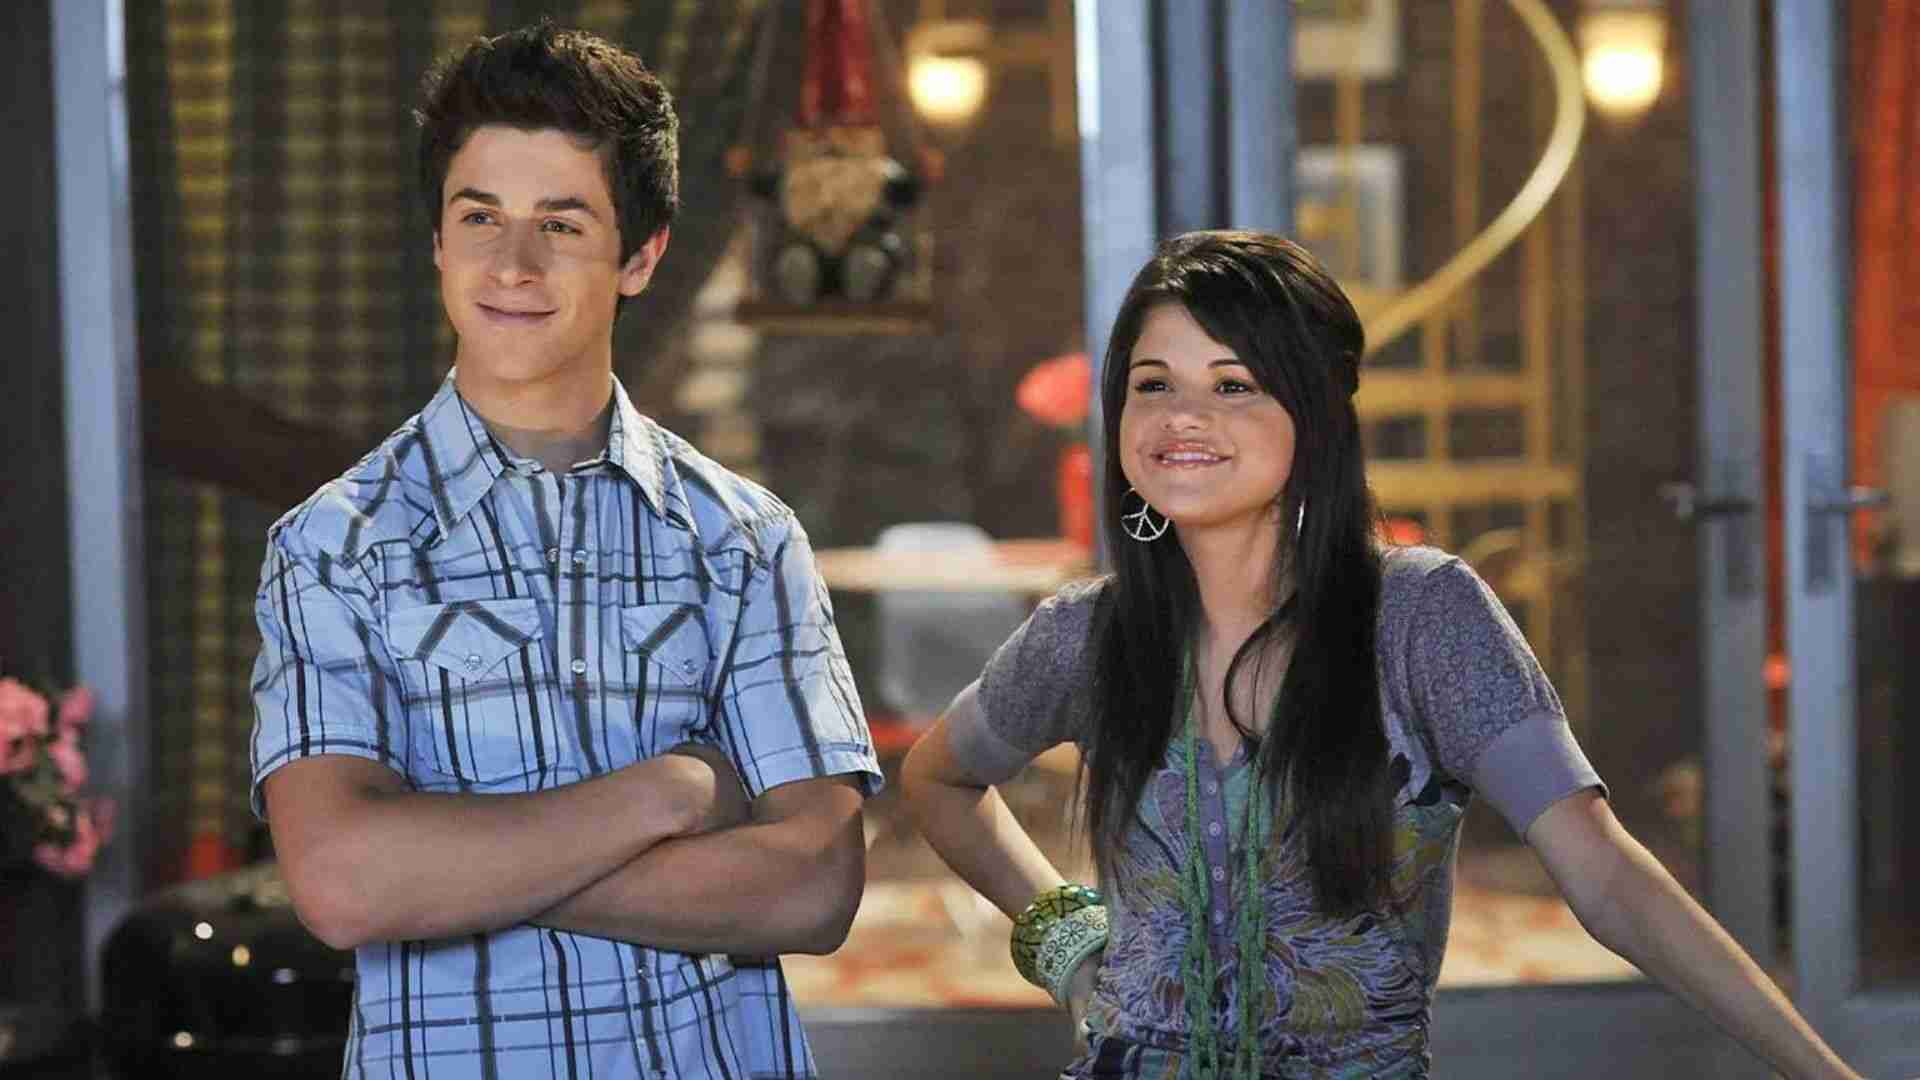 David Henrie Shares Sentimental Reunion With Selena Gomez In ‘Wizards of Waverly Place’ Sequel